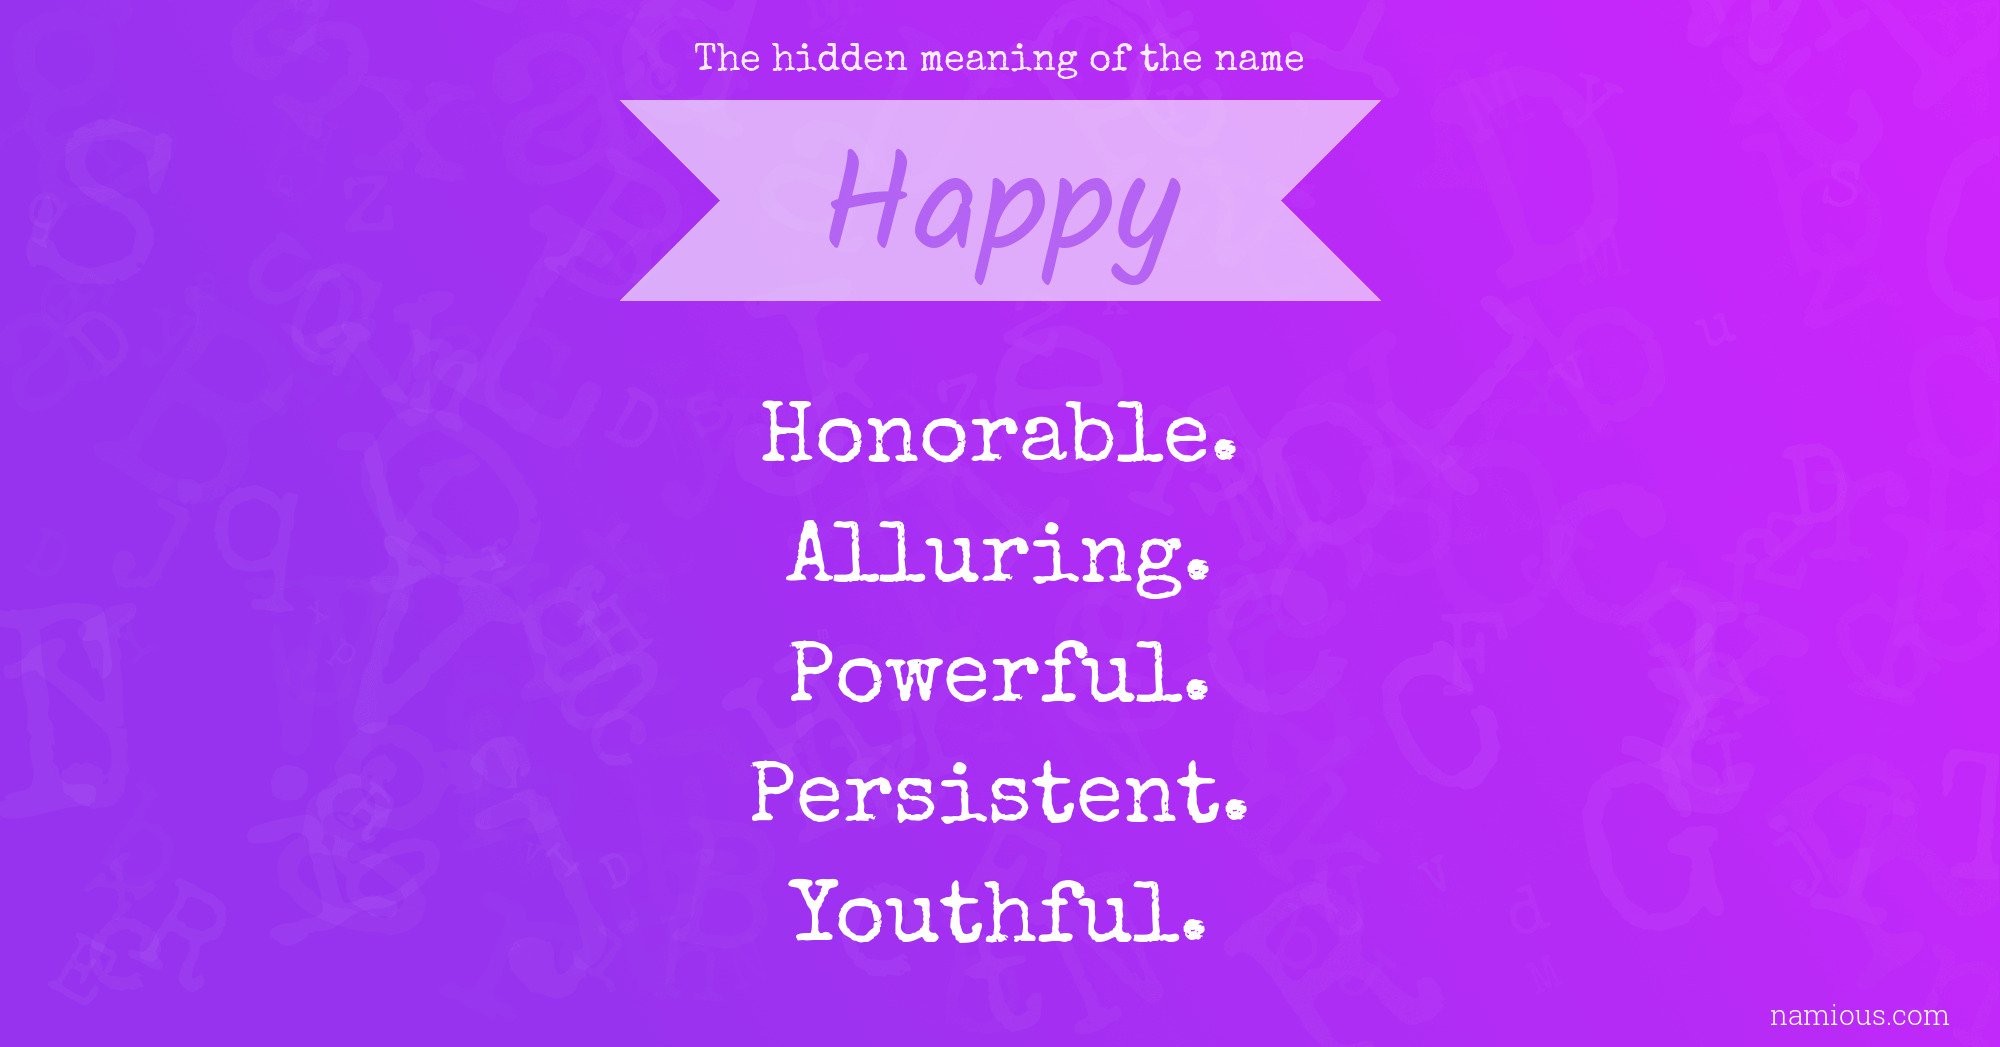 The hidden meaning of the name Happy